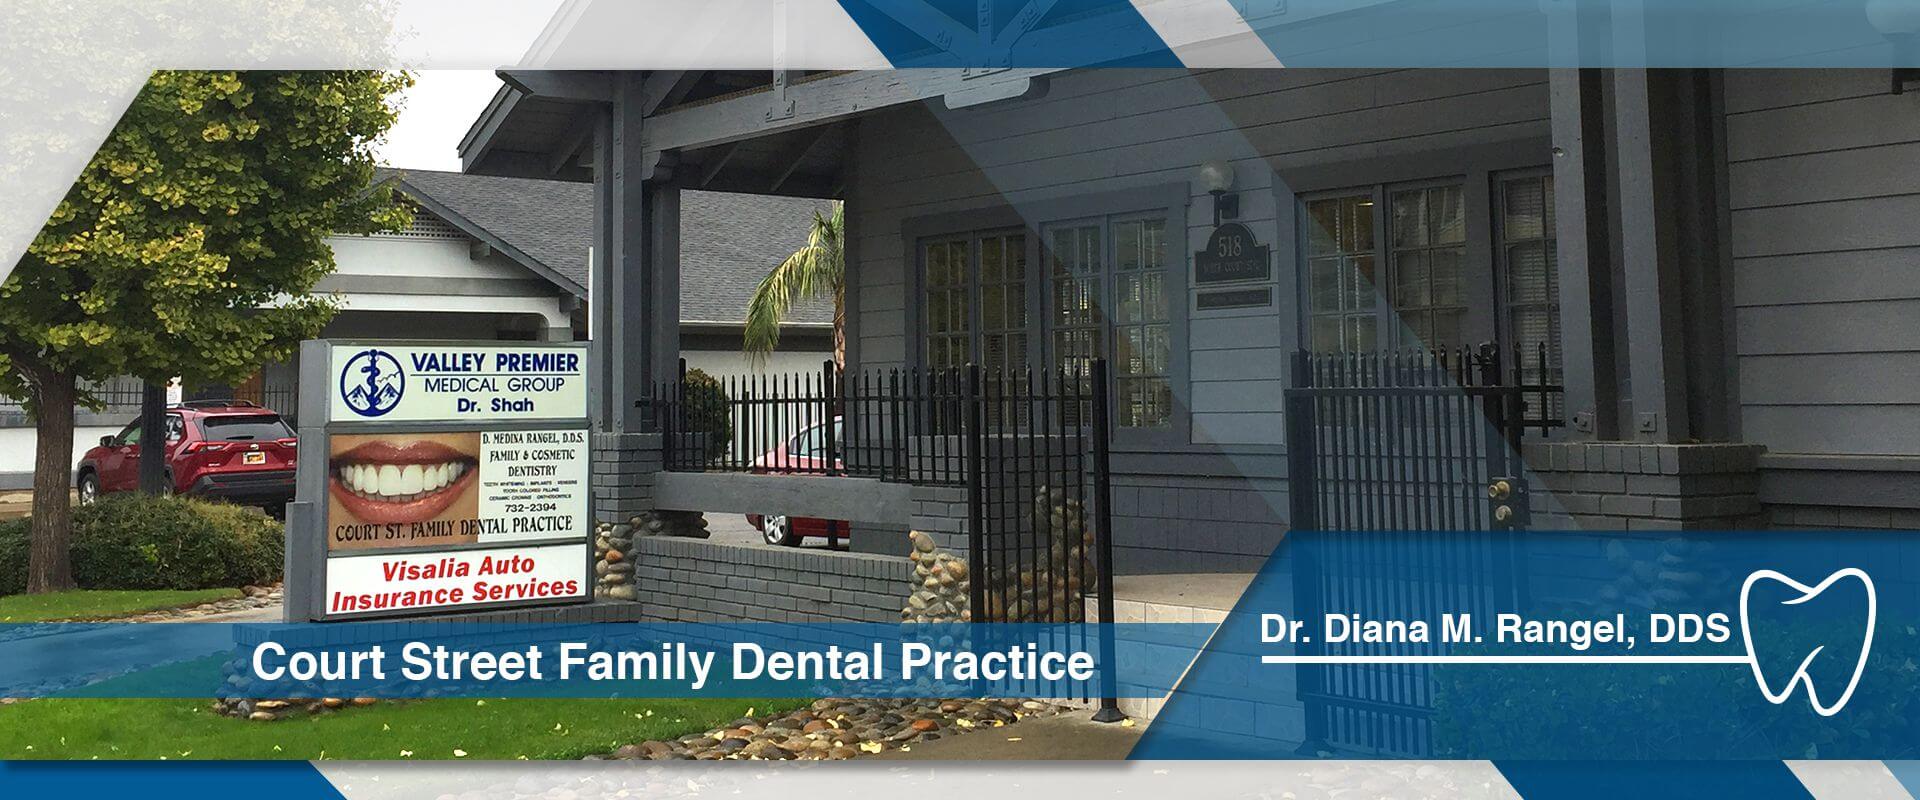 Best Cosmetic Dentistry Services Visalia